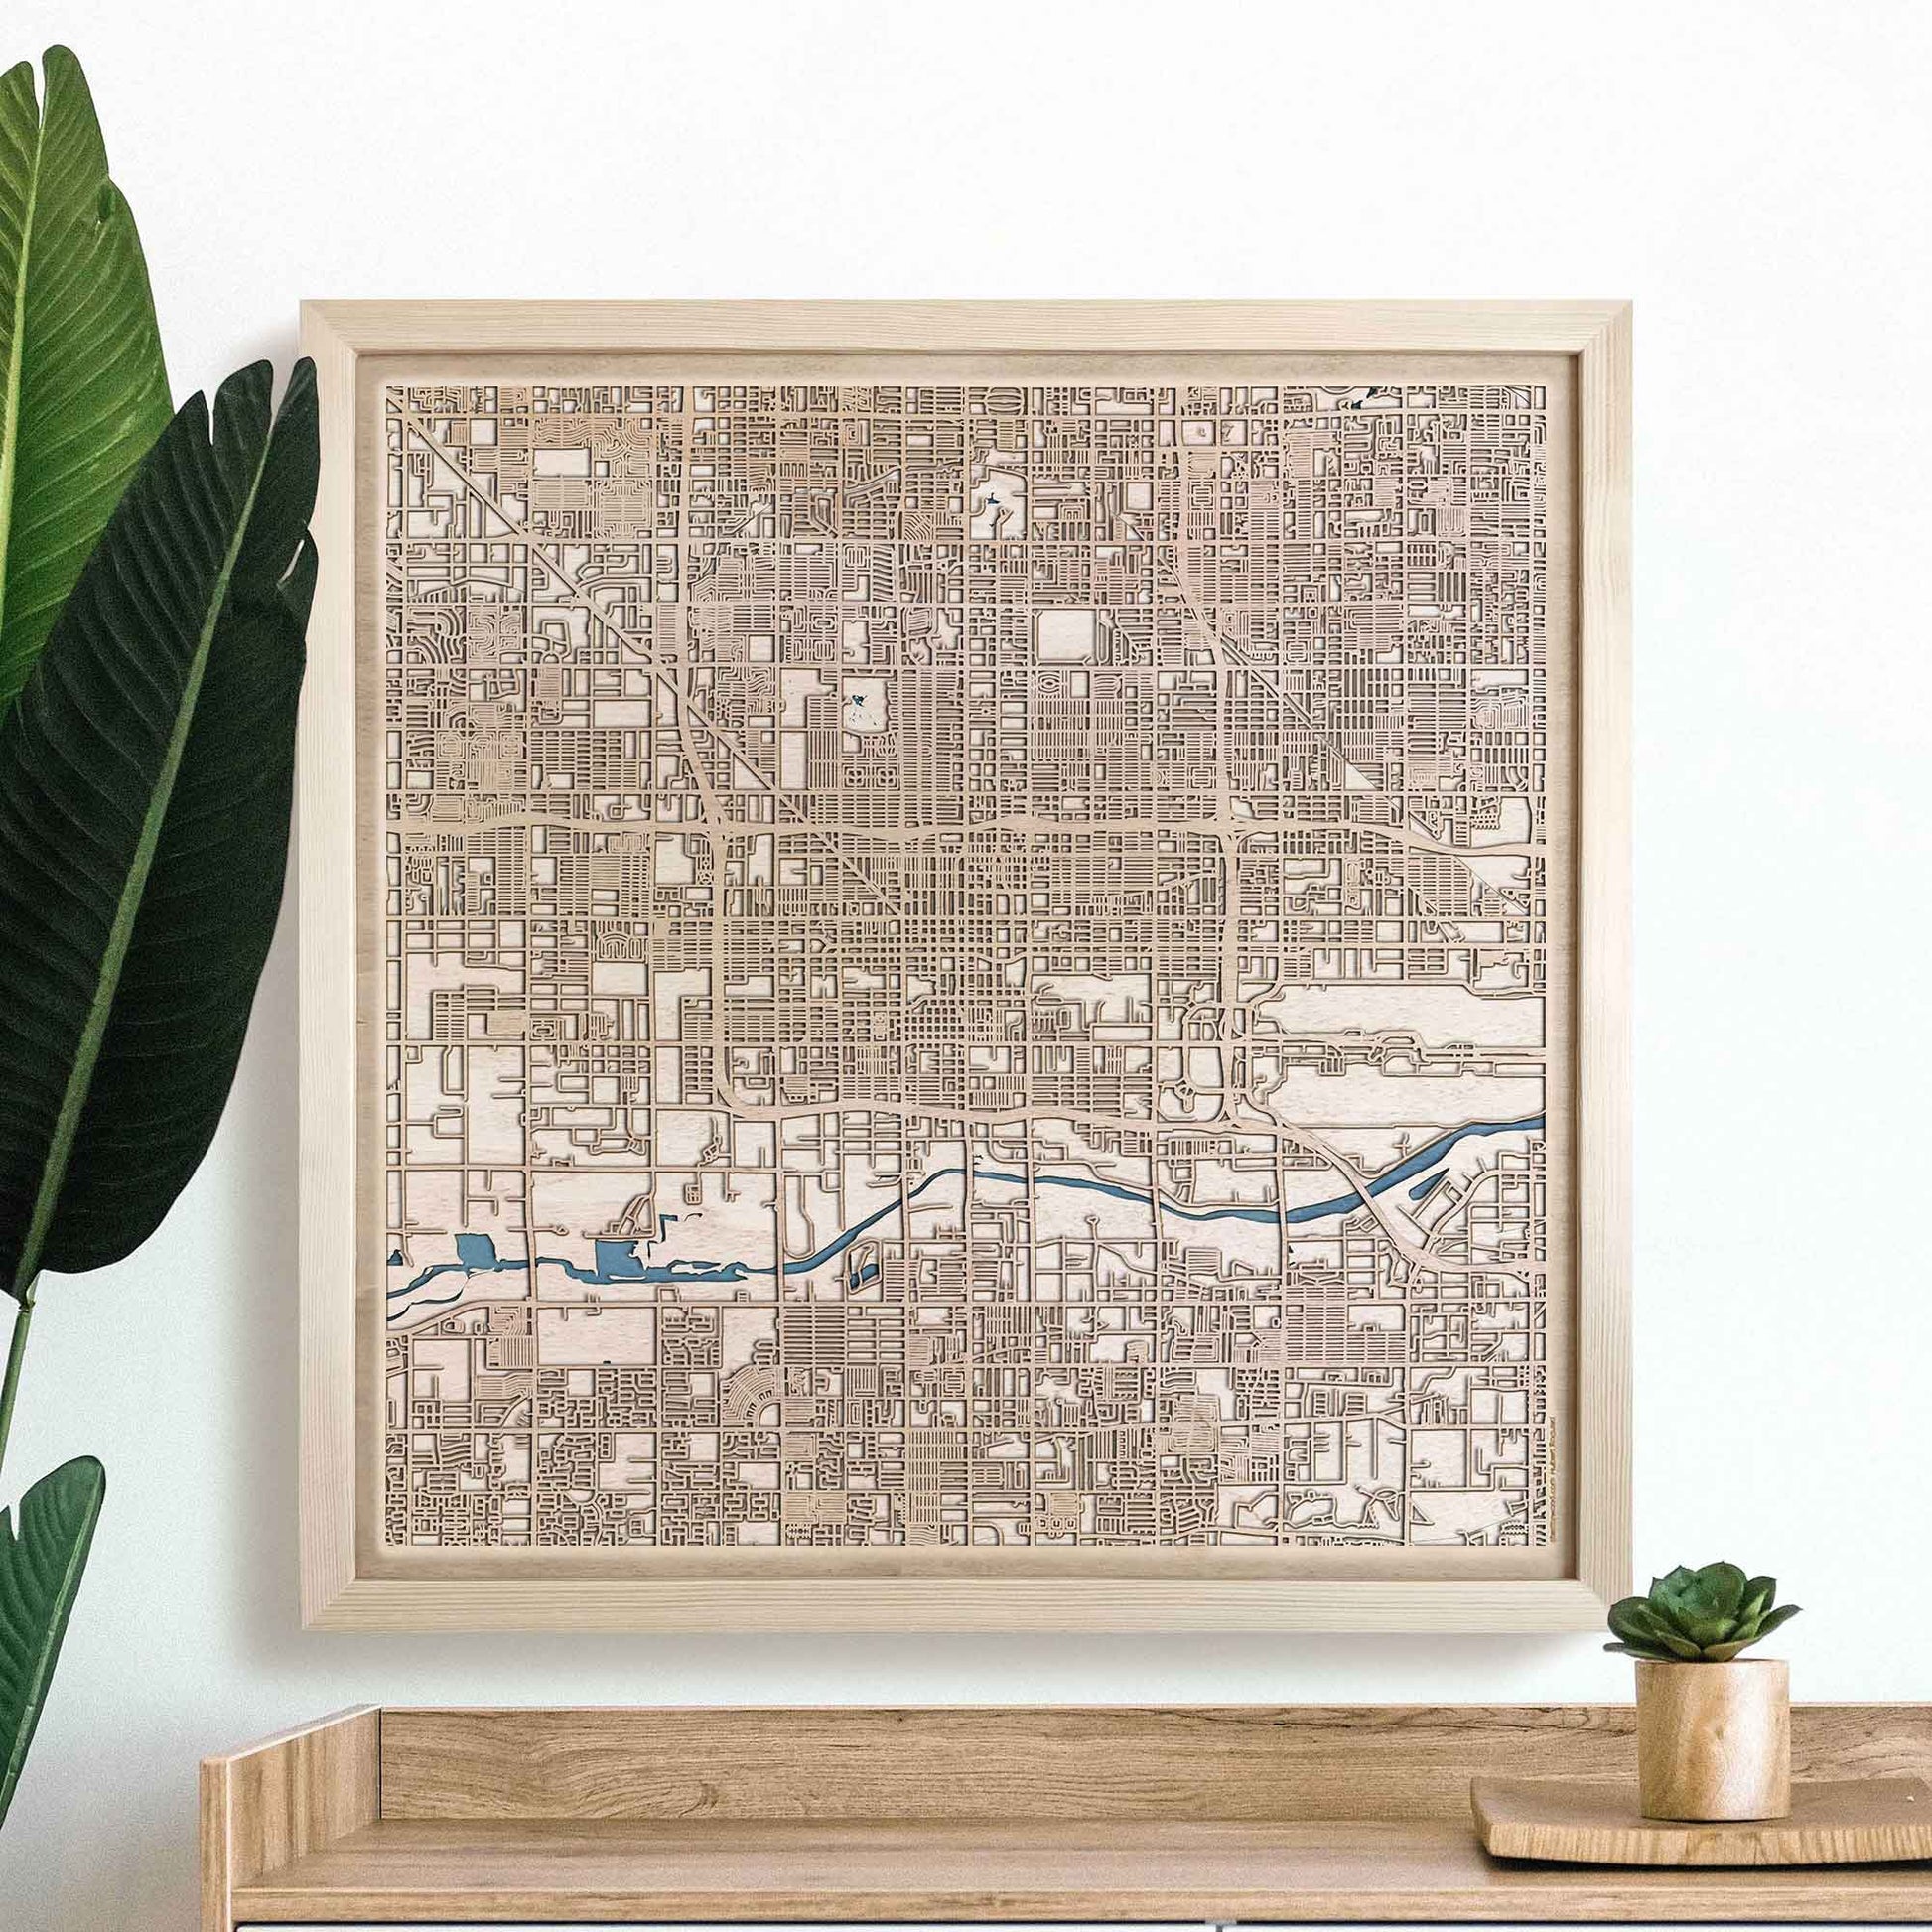 Phoenix Wooden Map by CityWood - Custom Wood Map Art - Unique Laser Cut Engraved - Anniversary Gift